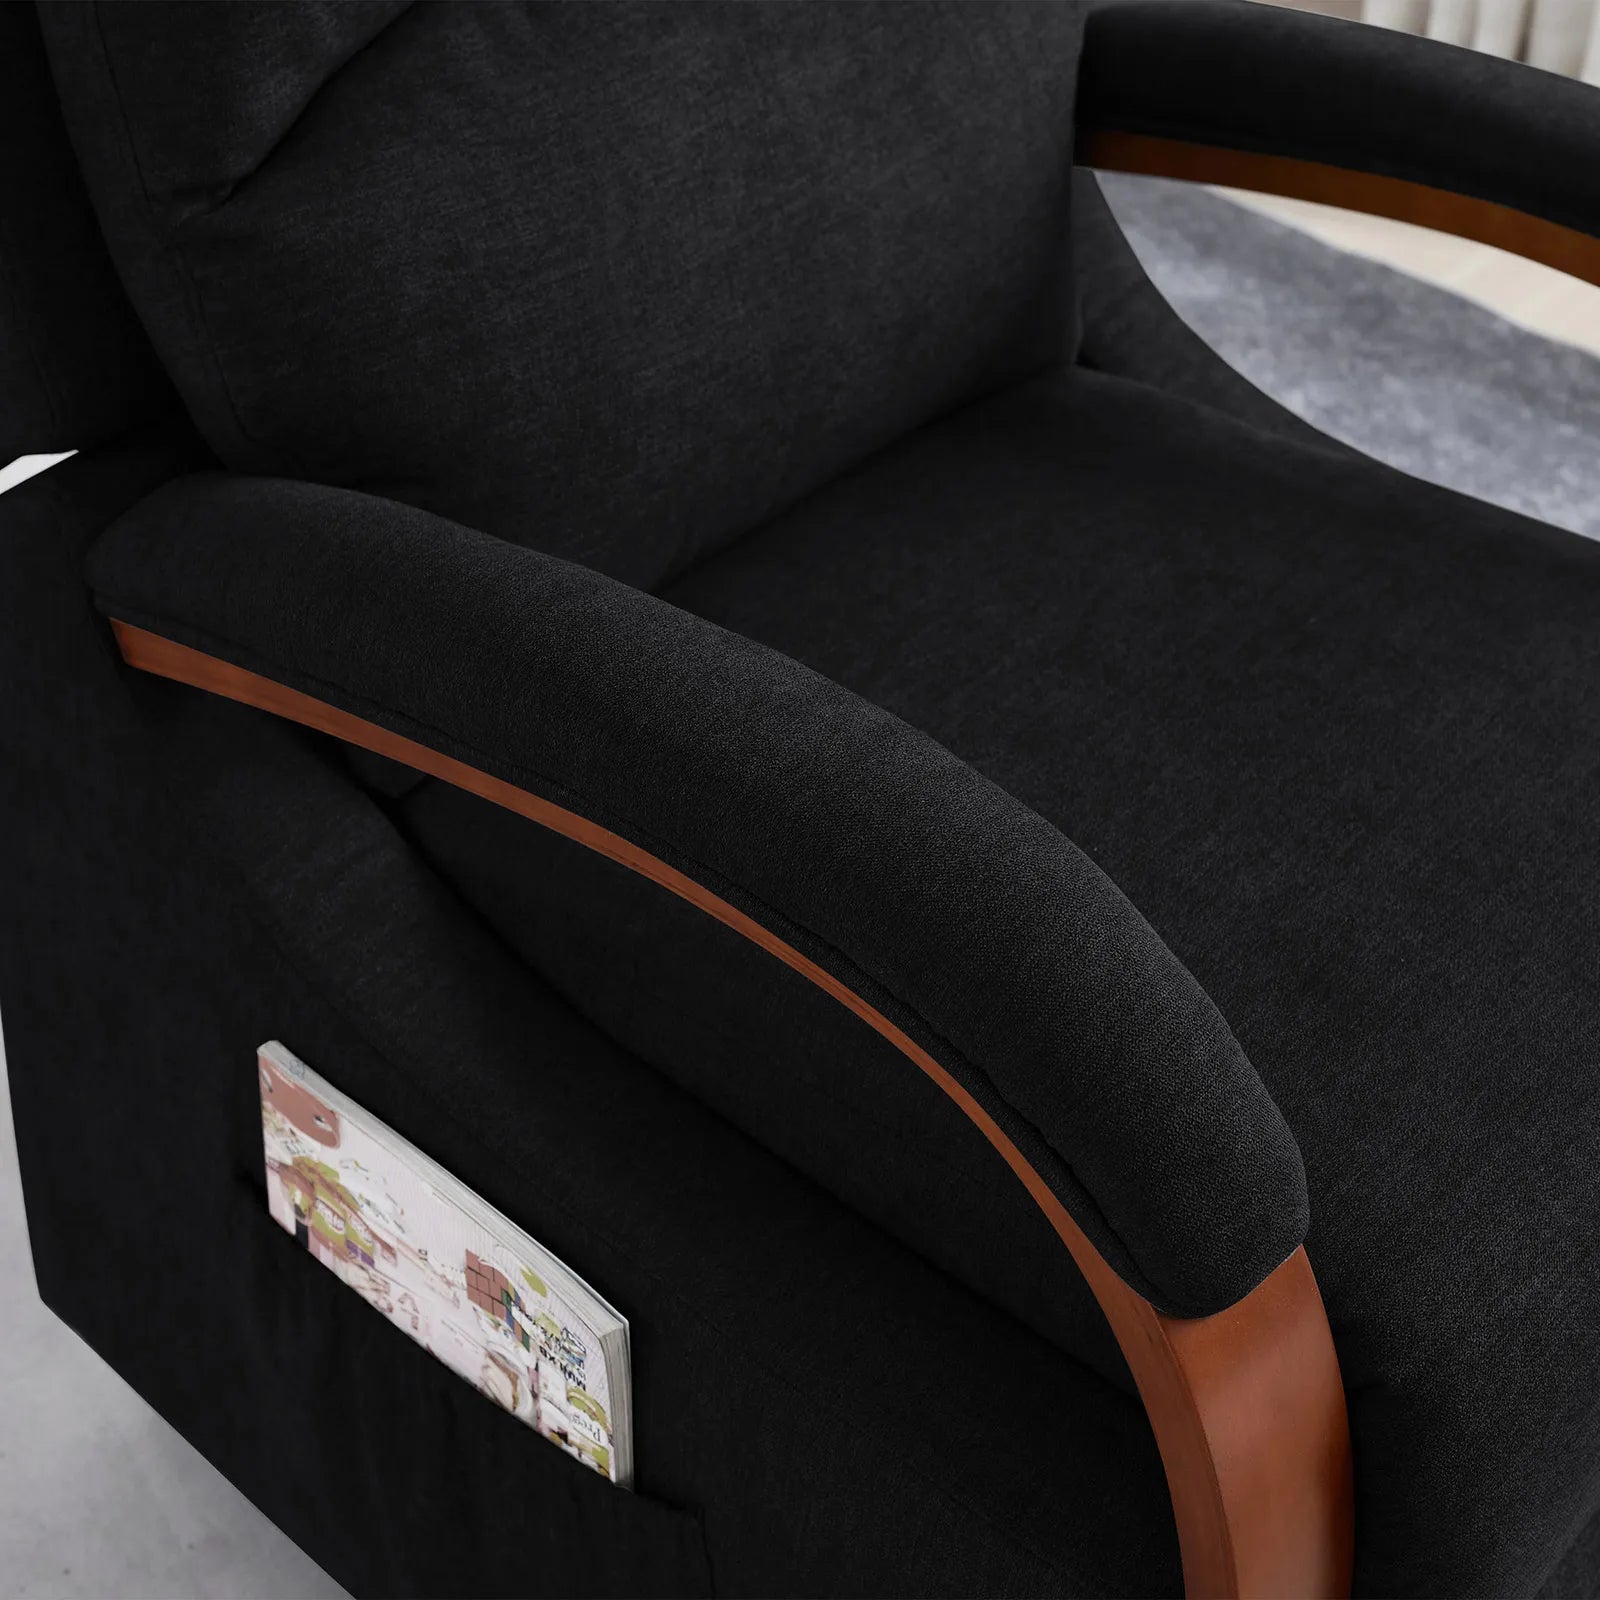 lift recliner with wood armrest